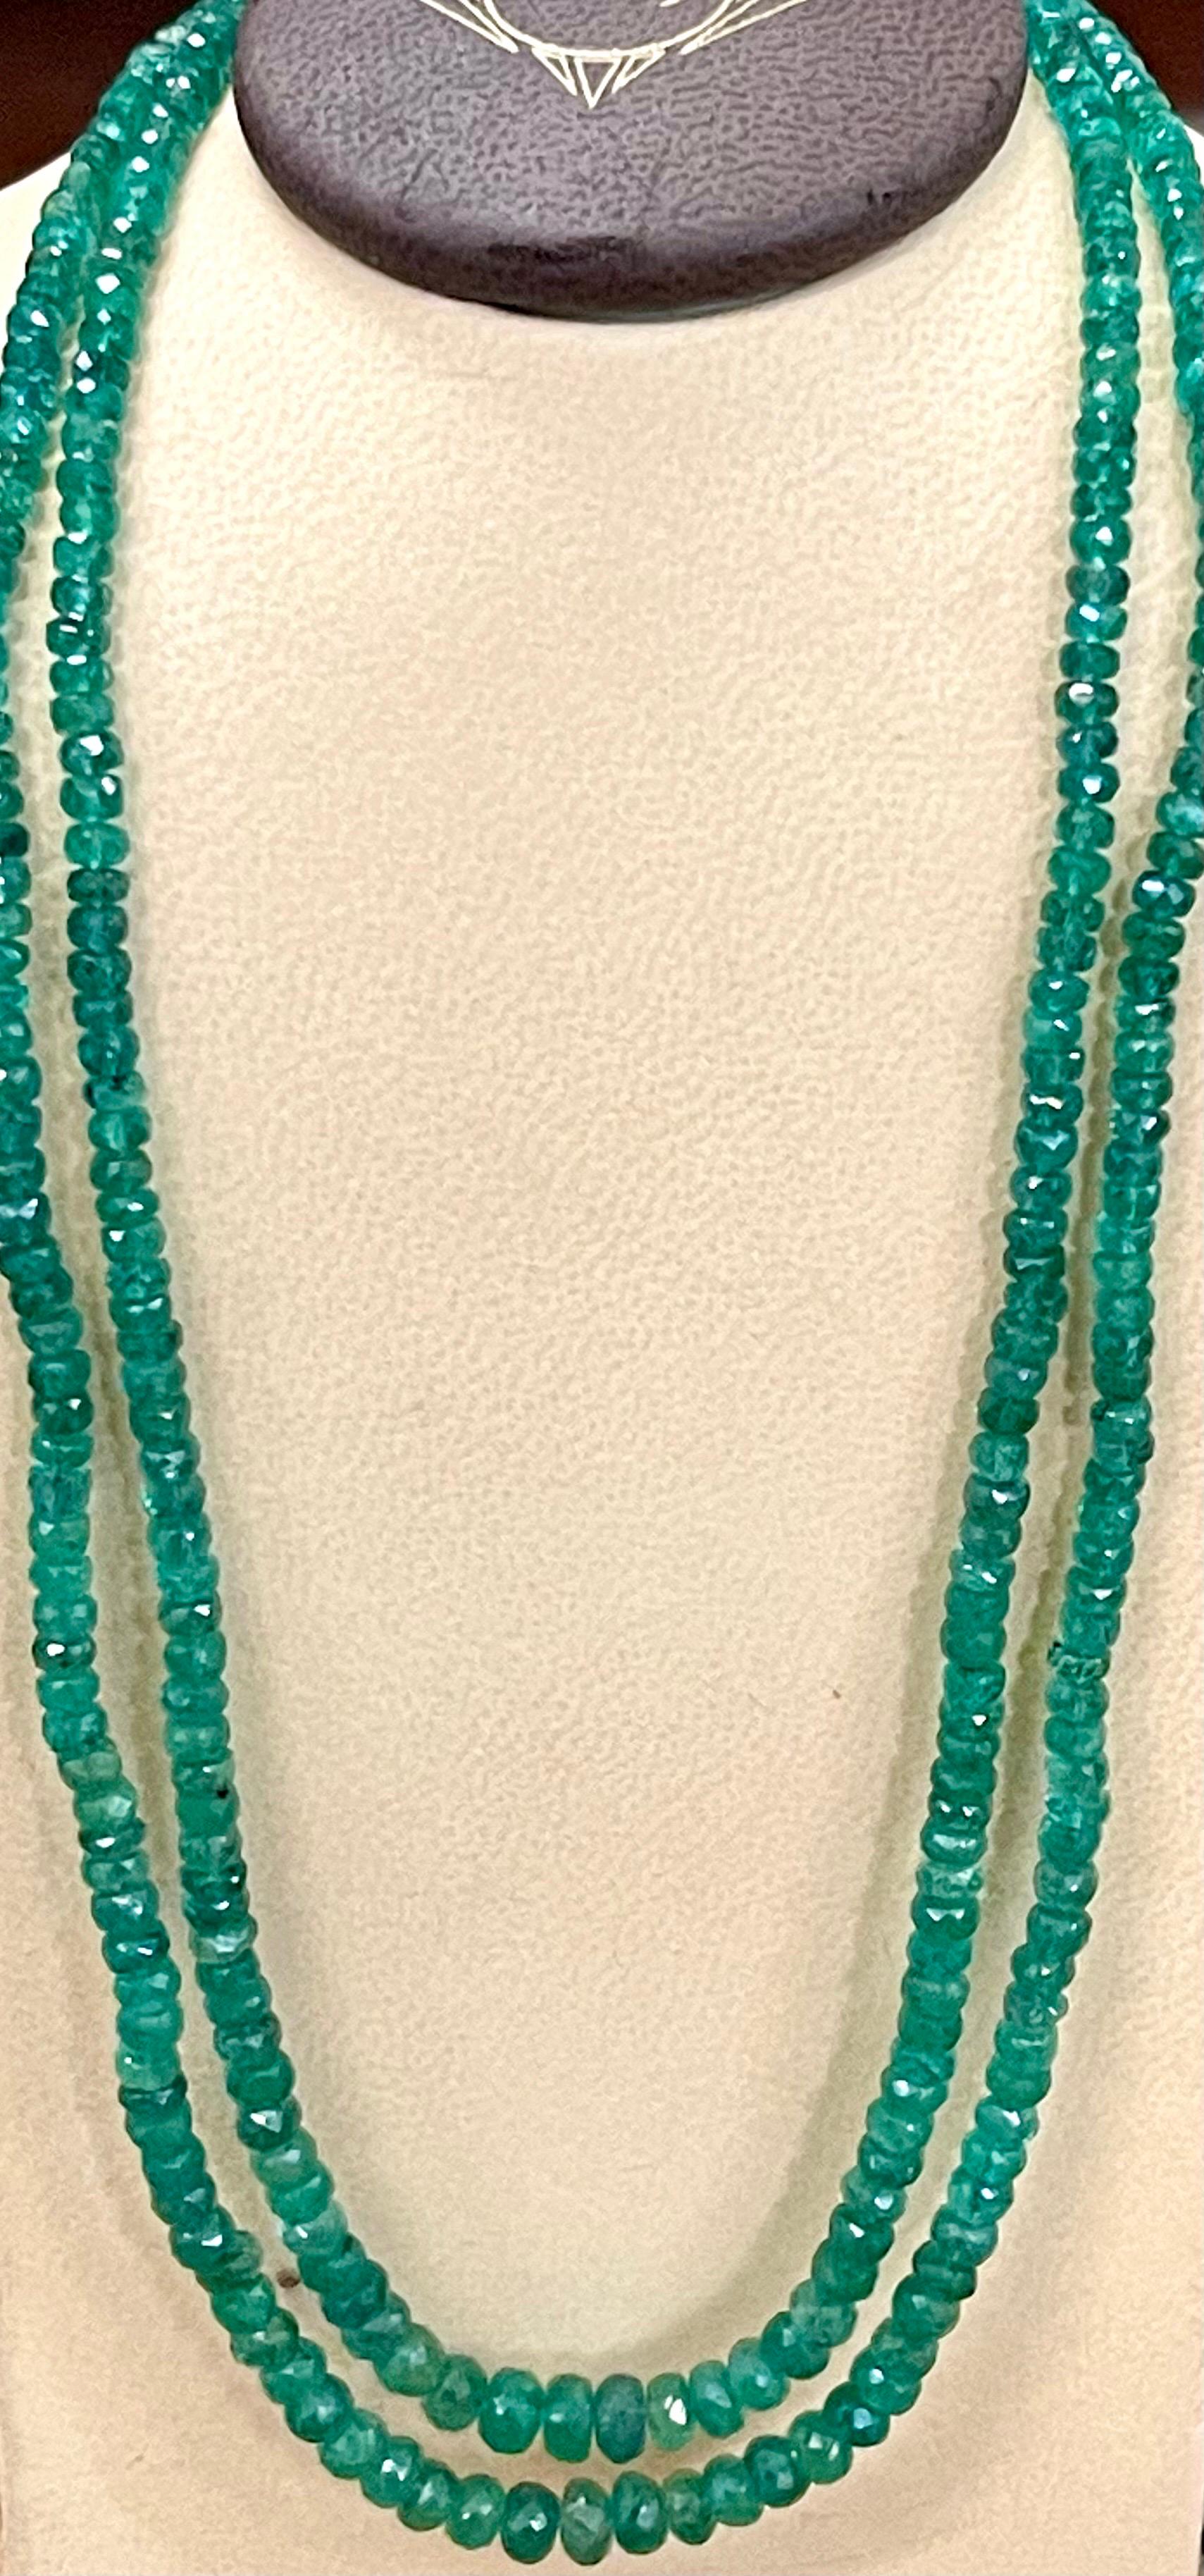 145 Ct Fine Natural Emerald Beads 2 Line Necklace with 14 Kt Yellow Gold Clasp For Sale 2